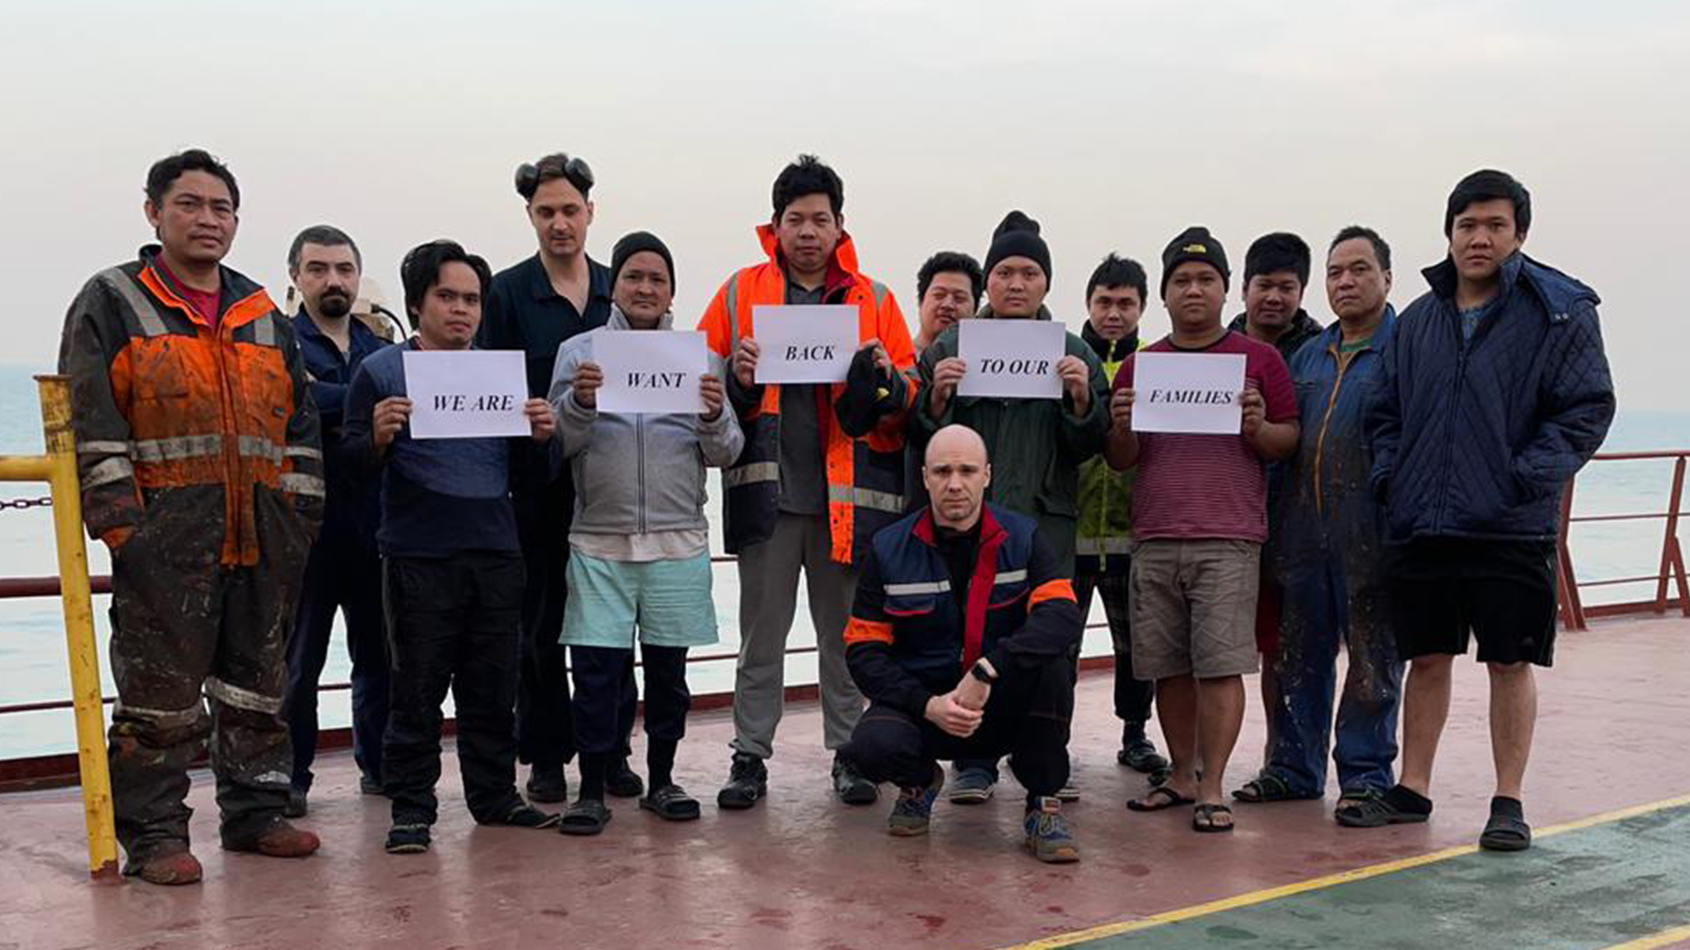 The crew of the MV Christine Oldendorff have been anchored at Caofeidian in Bohai Bay, near Beijing, since 26 August 2020. Now eight months stranded, with 20 on board for more than 18 months in total: they are desperate to get home to their families.